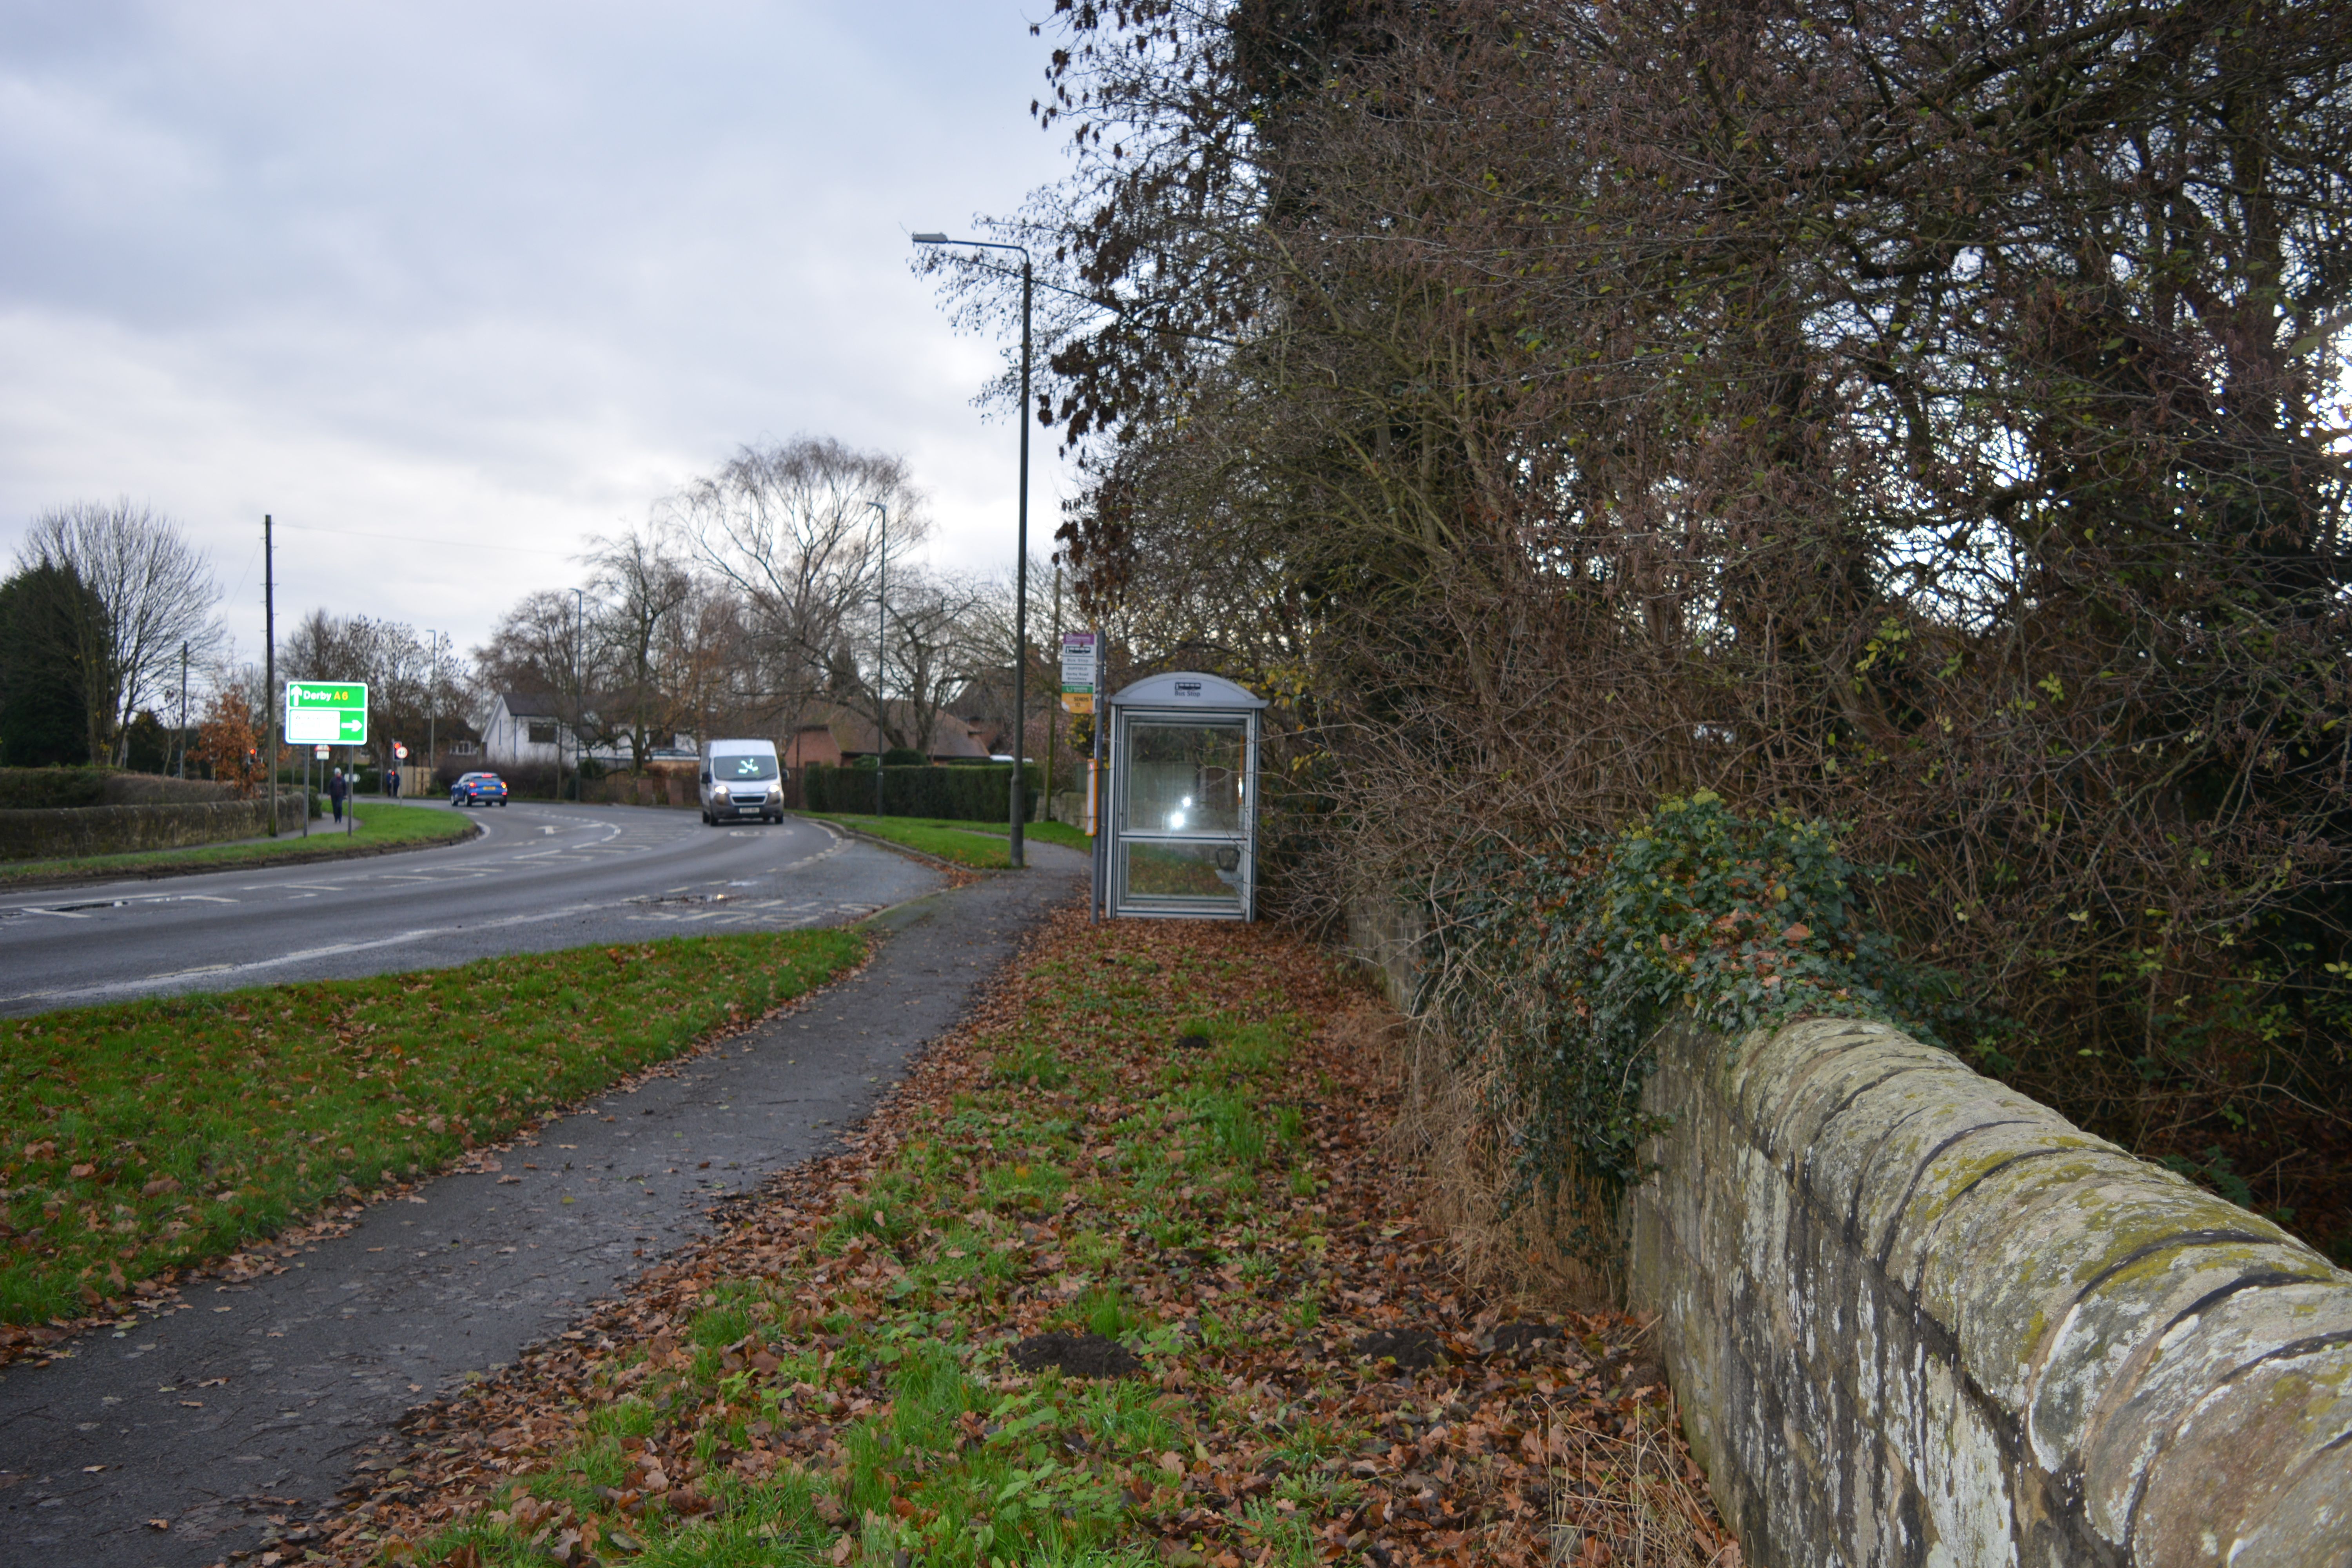 A6 and Bus stop towards Belper